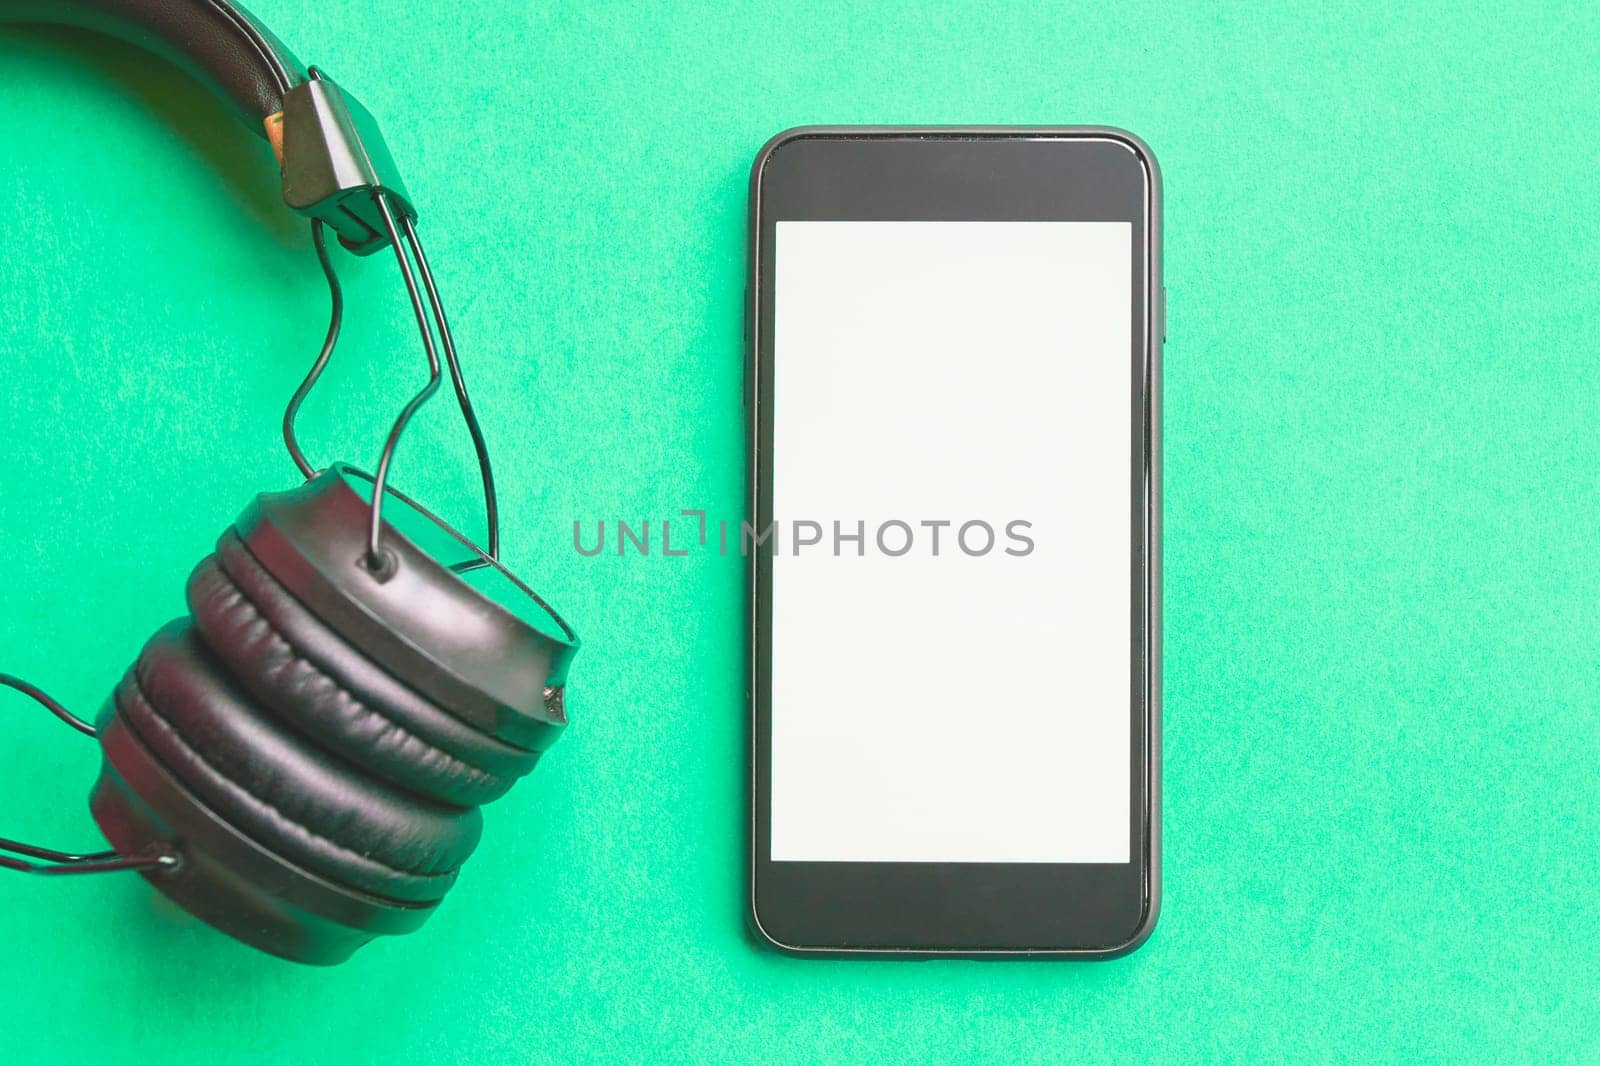 Headphones and smartphone on colorful background. Flat lay concept: headphones and telephone on green pastel backgrounds.